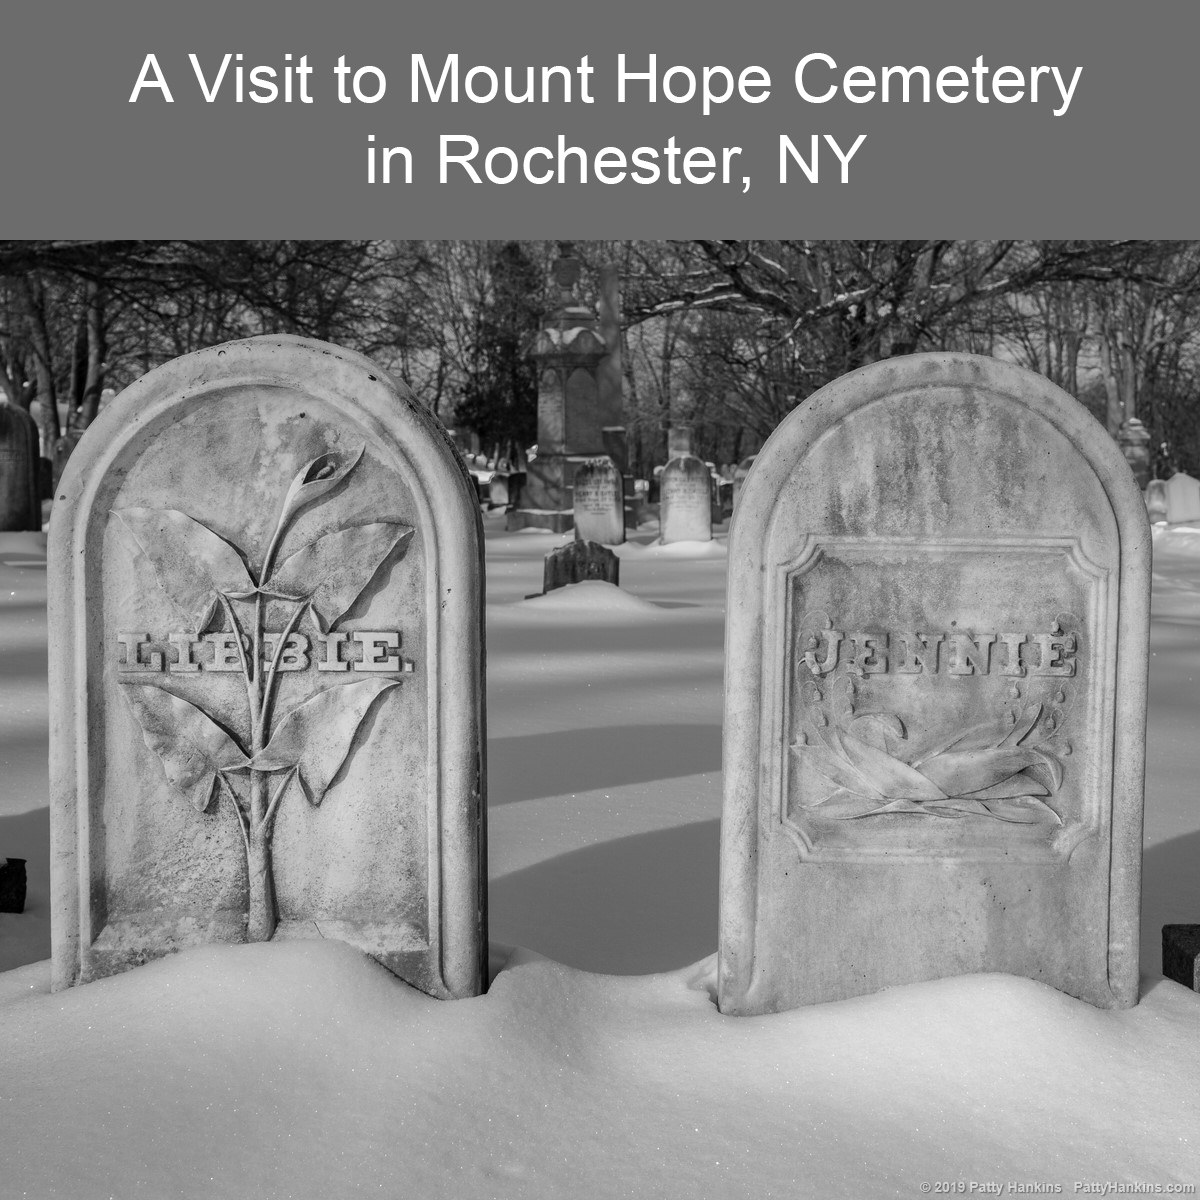 A Visit to Mount Hope Cemetery in Rochester